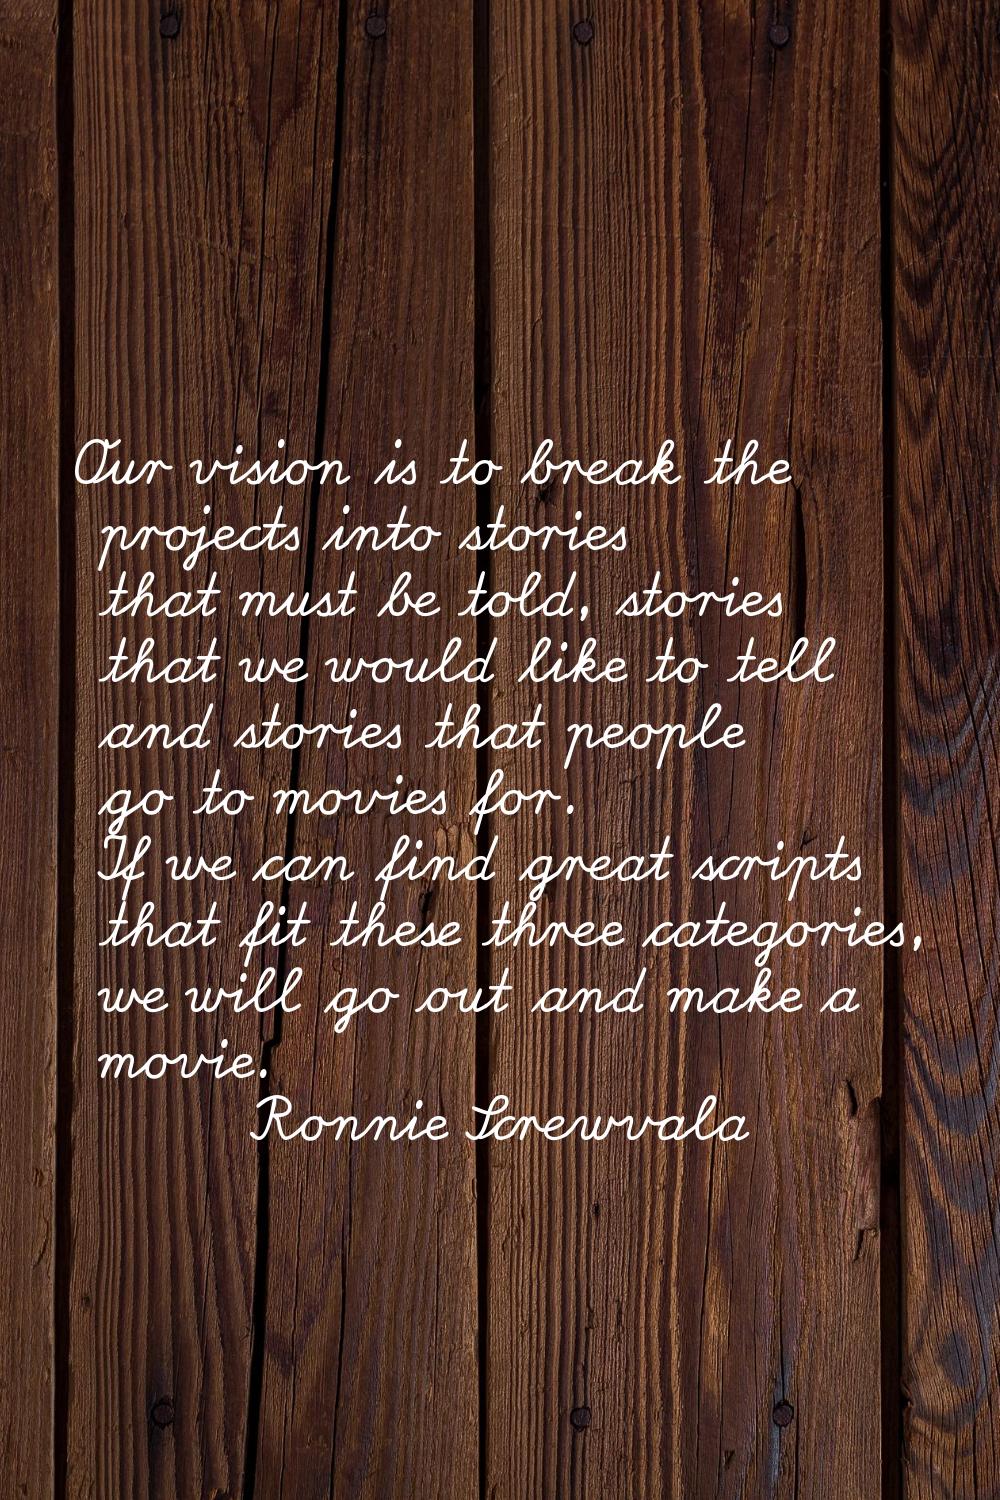 Our vision is to break the projects into stories that must be told, stories that we would like to t